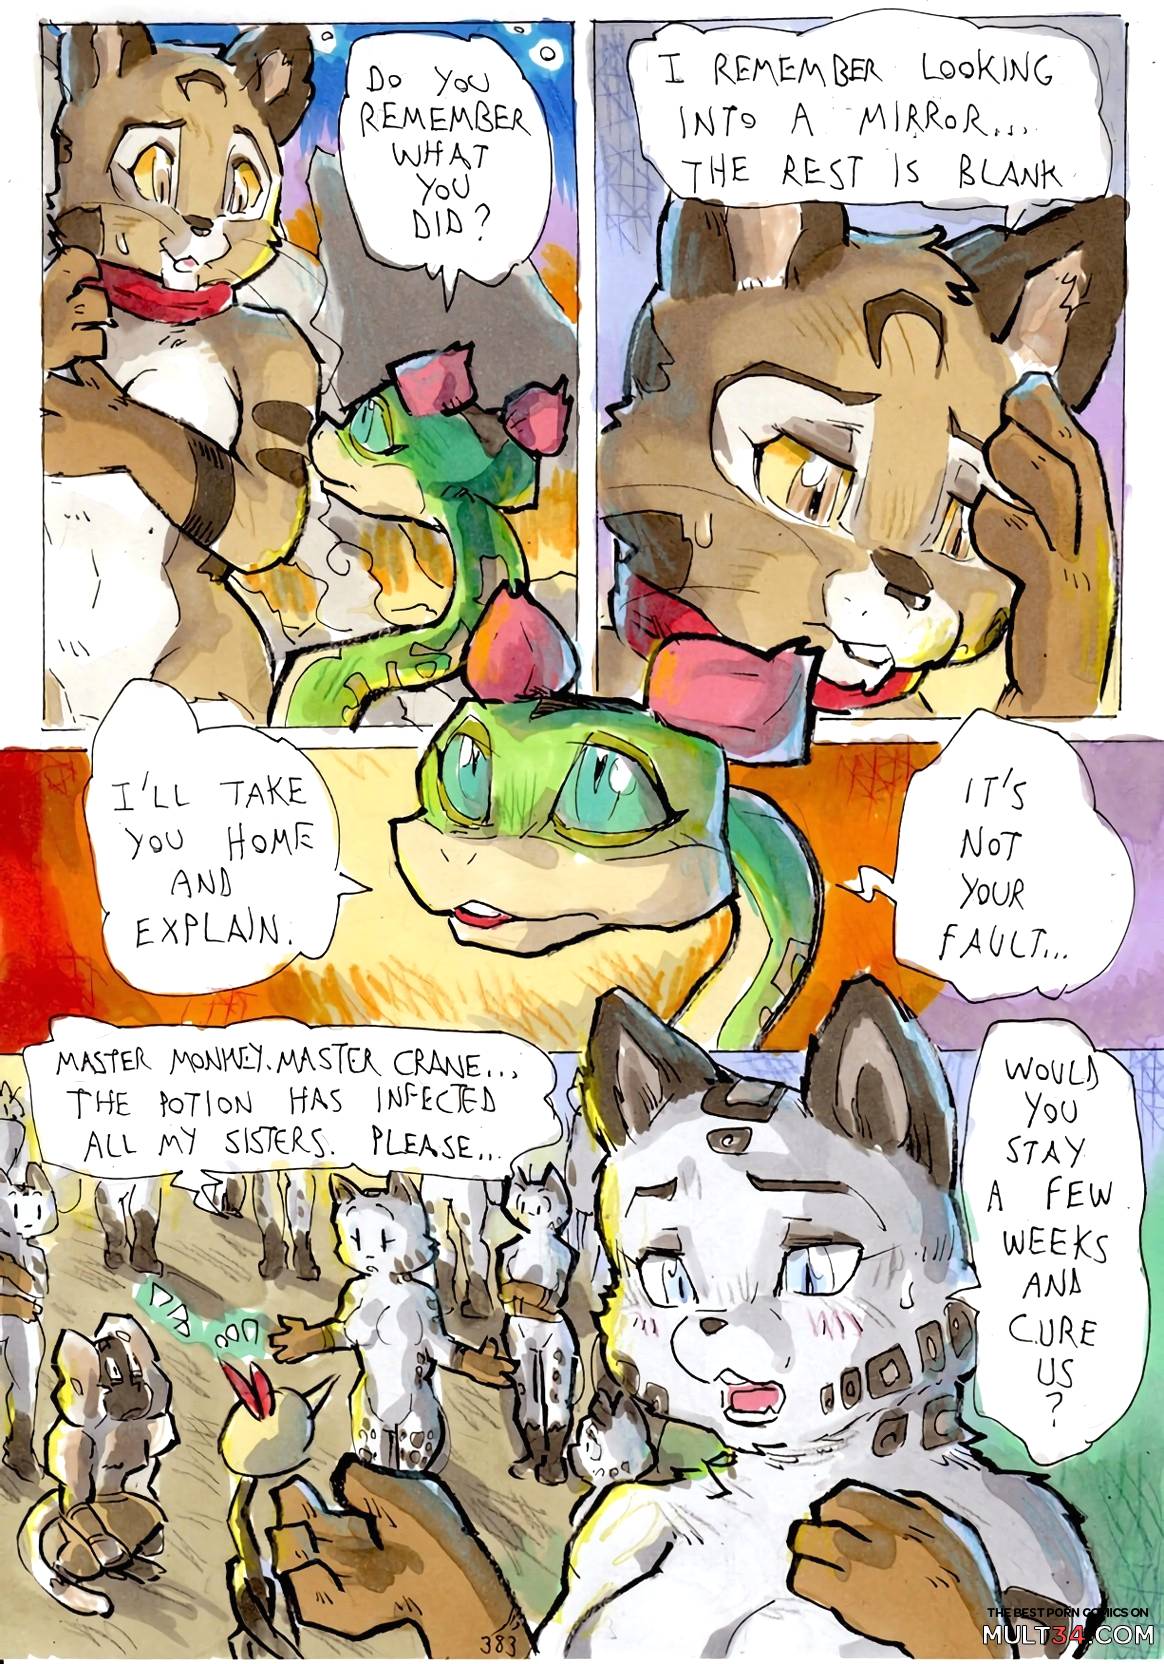 Better Late than Never 3 page 88